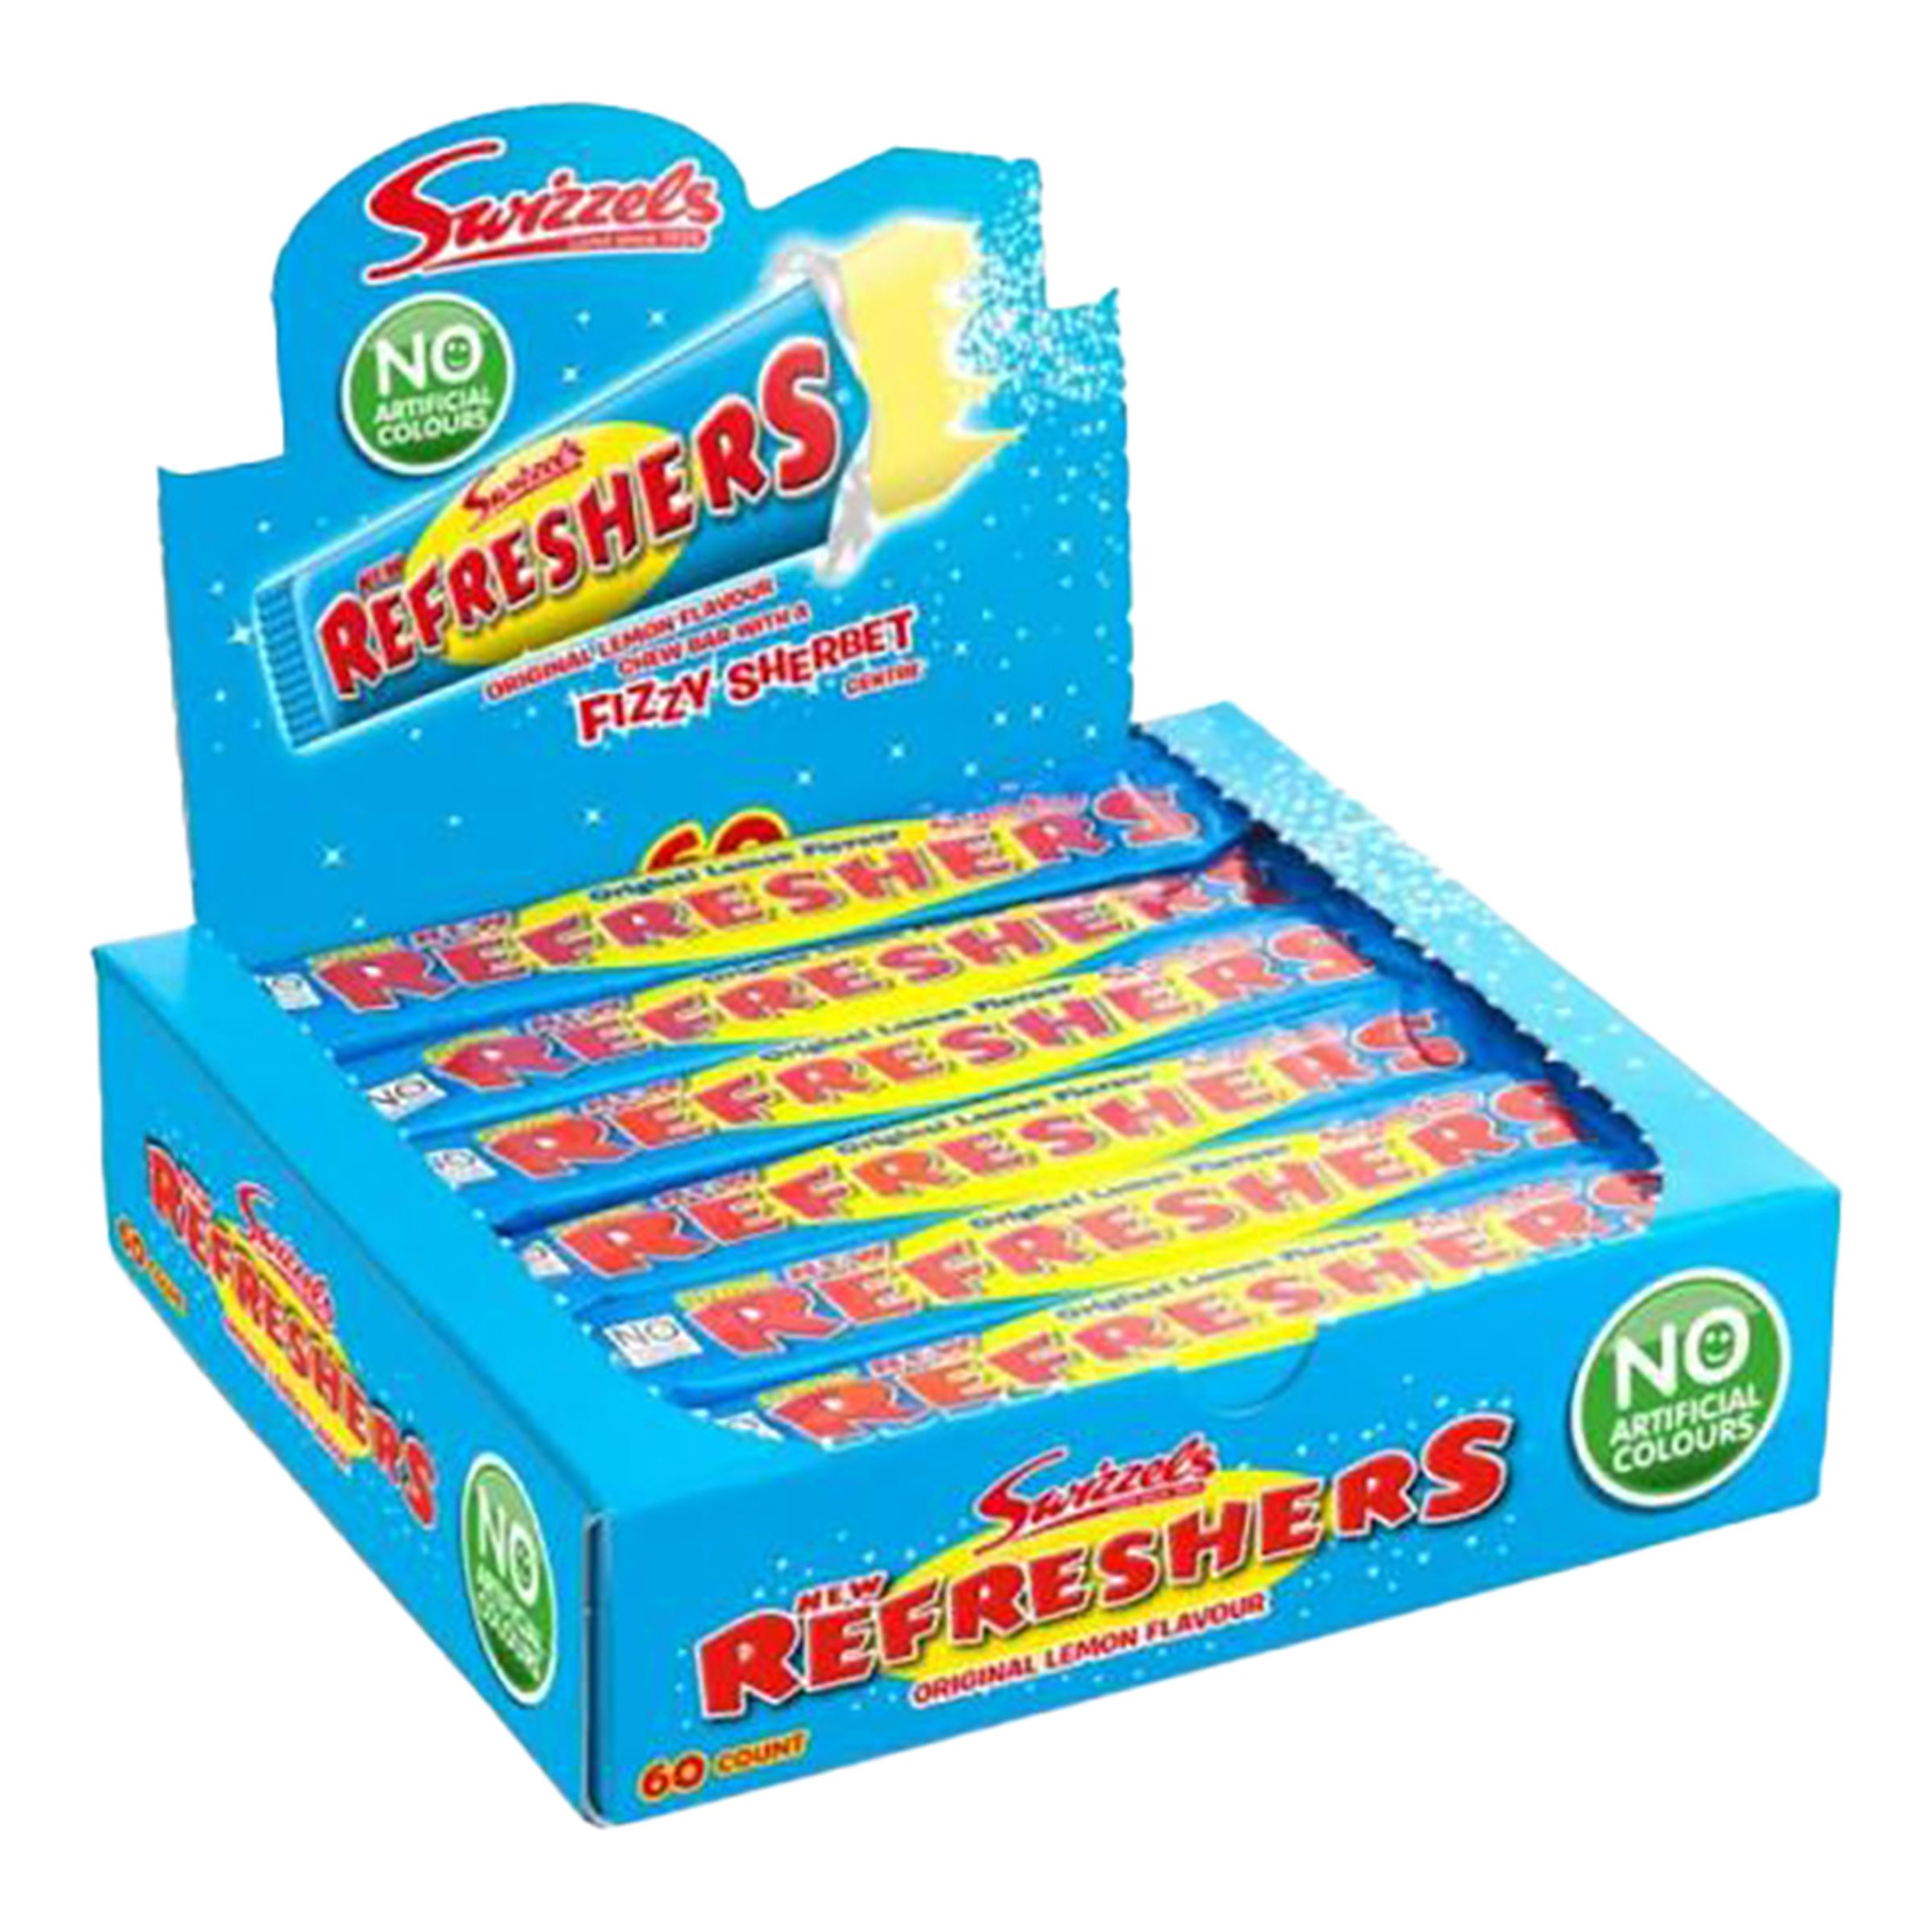 Refreshers Citron - 1-pack